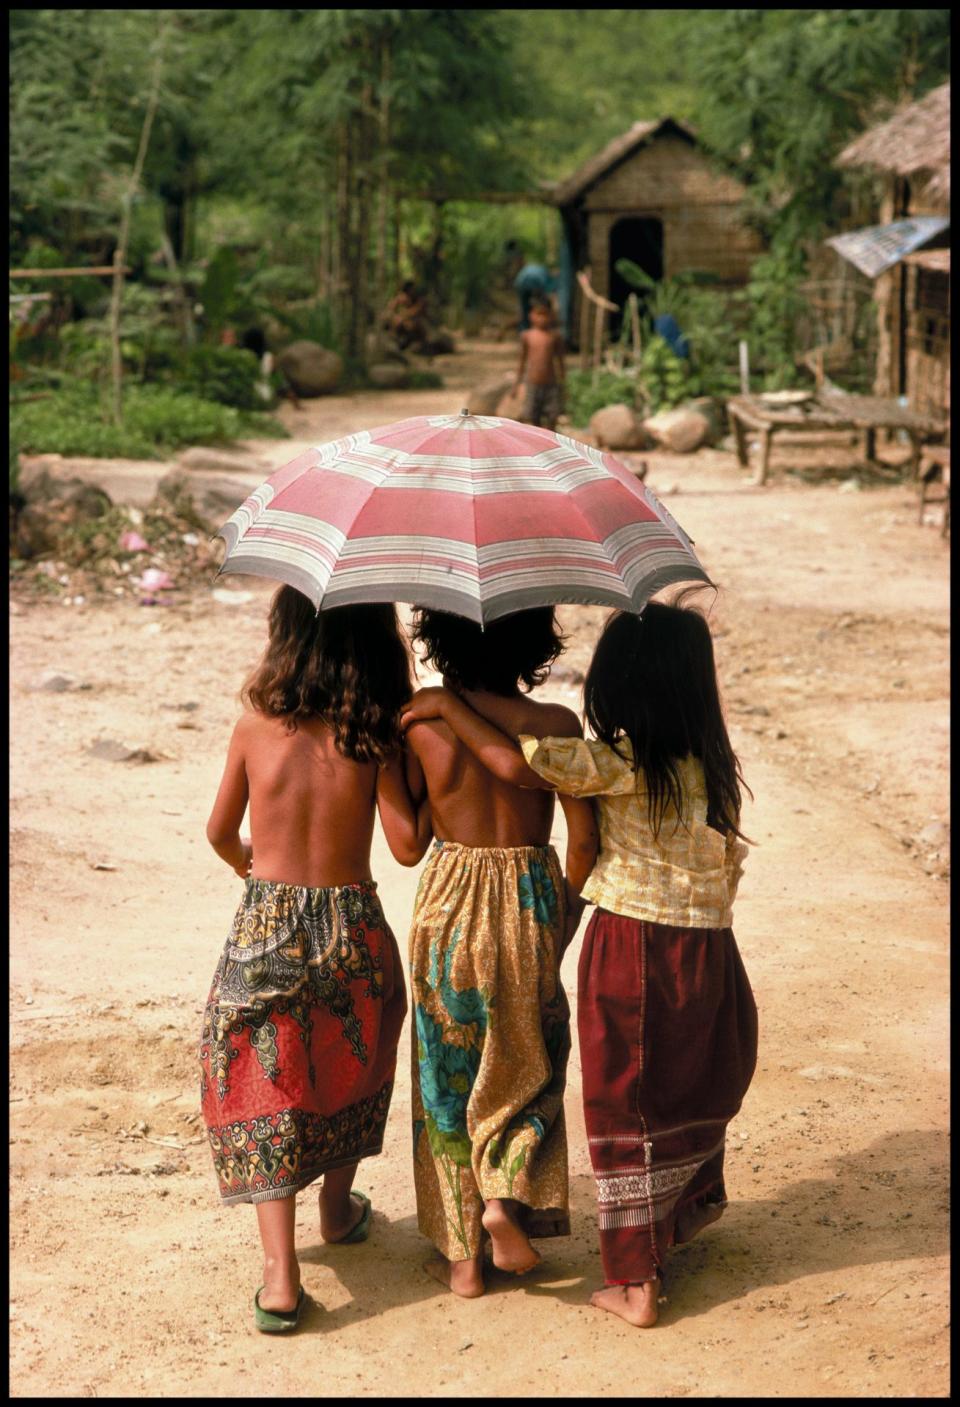 Cambodian children in a refugee camp on the Thailand border, 1988. (Photograph by Peter Turnley, Bates College Museum of Art; gift of John and Claudia McIntyre)